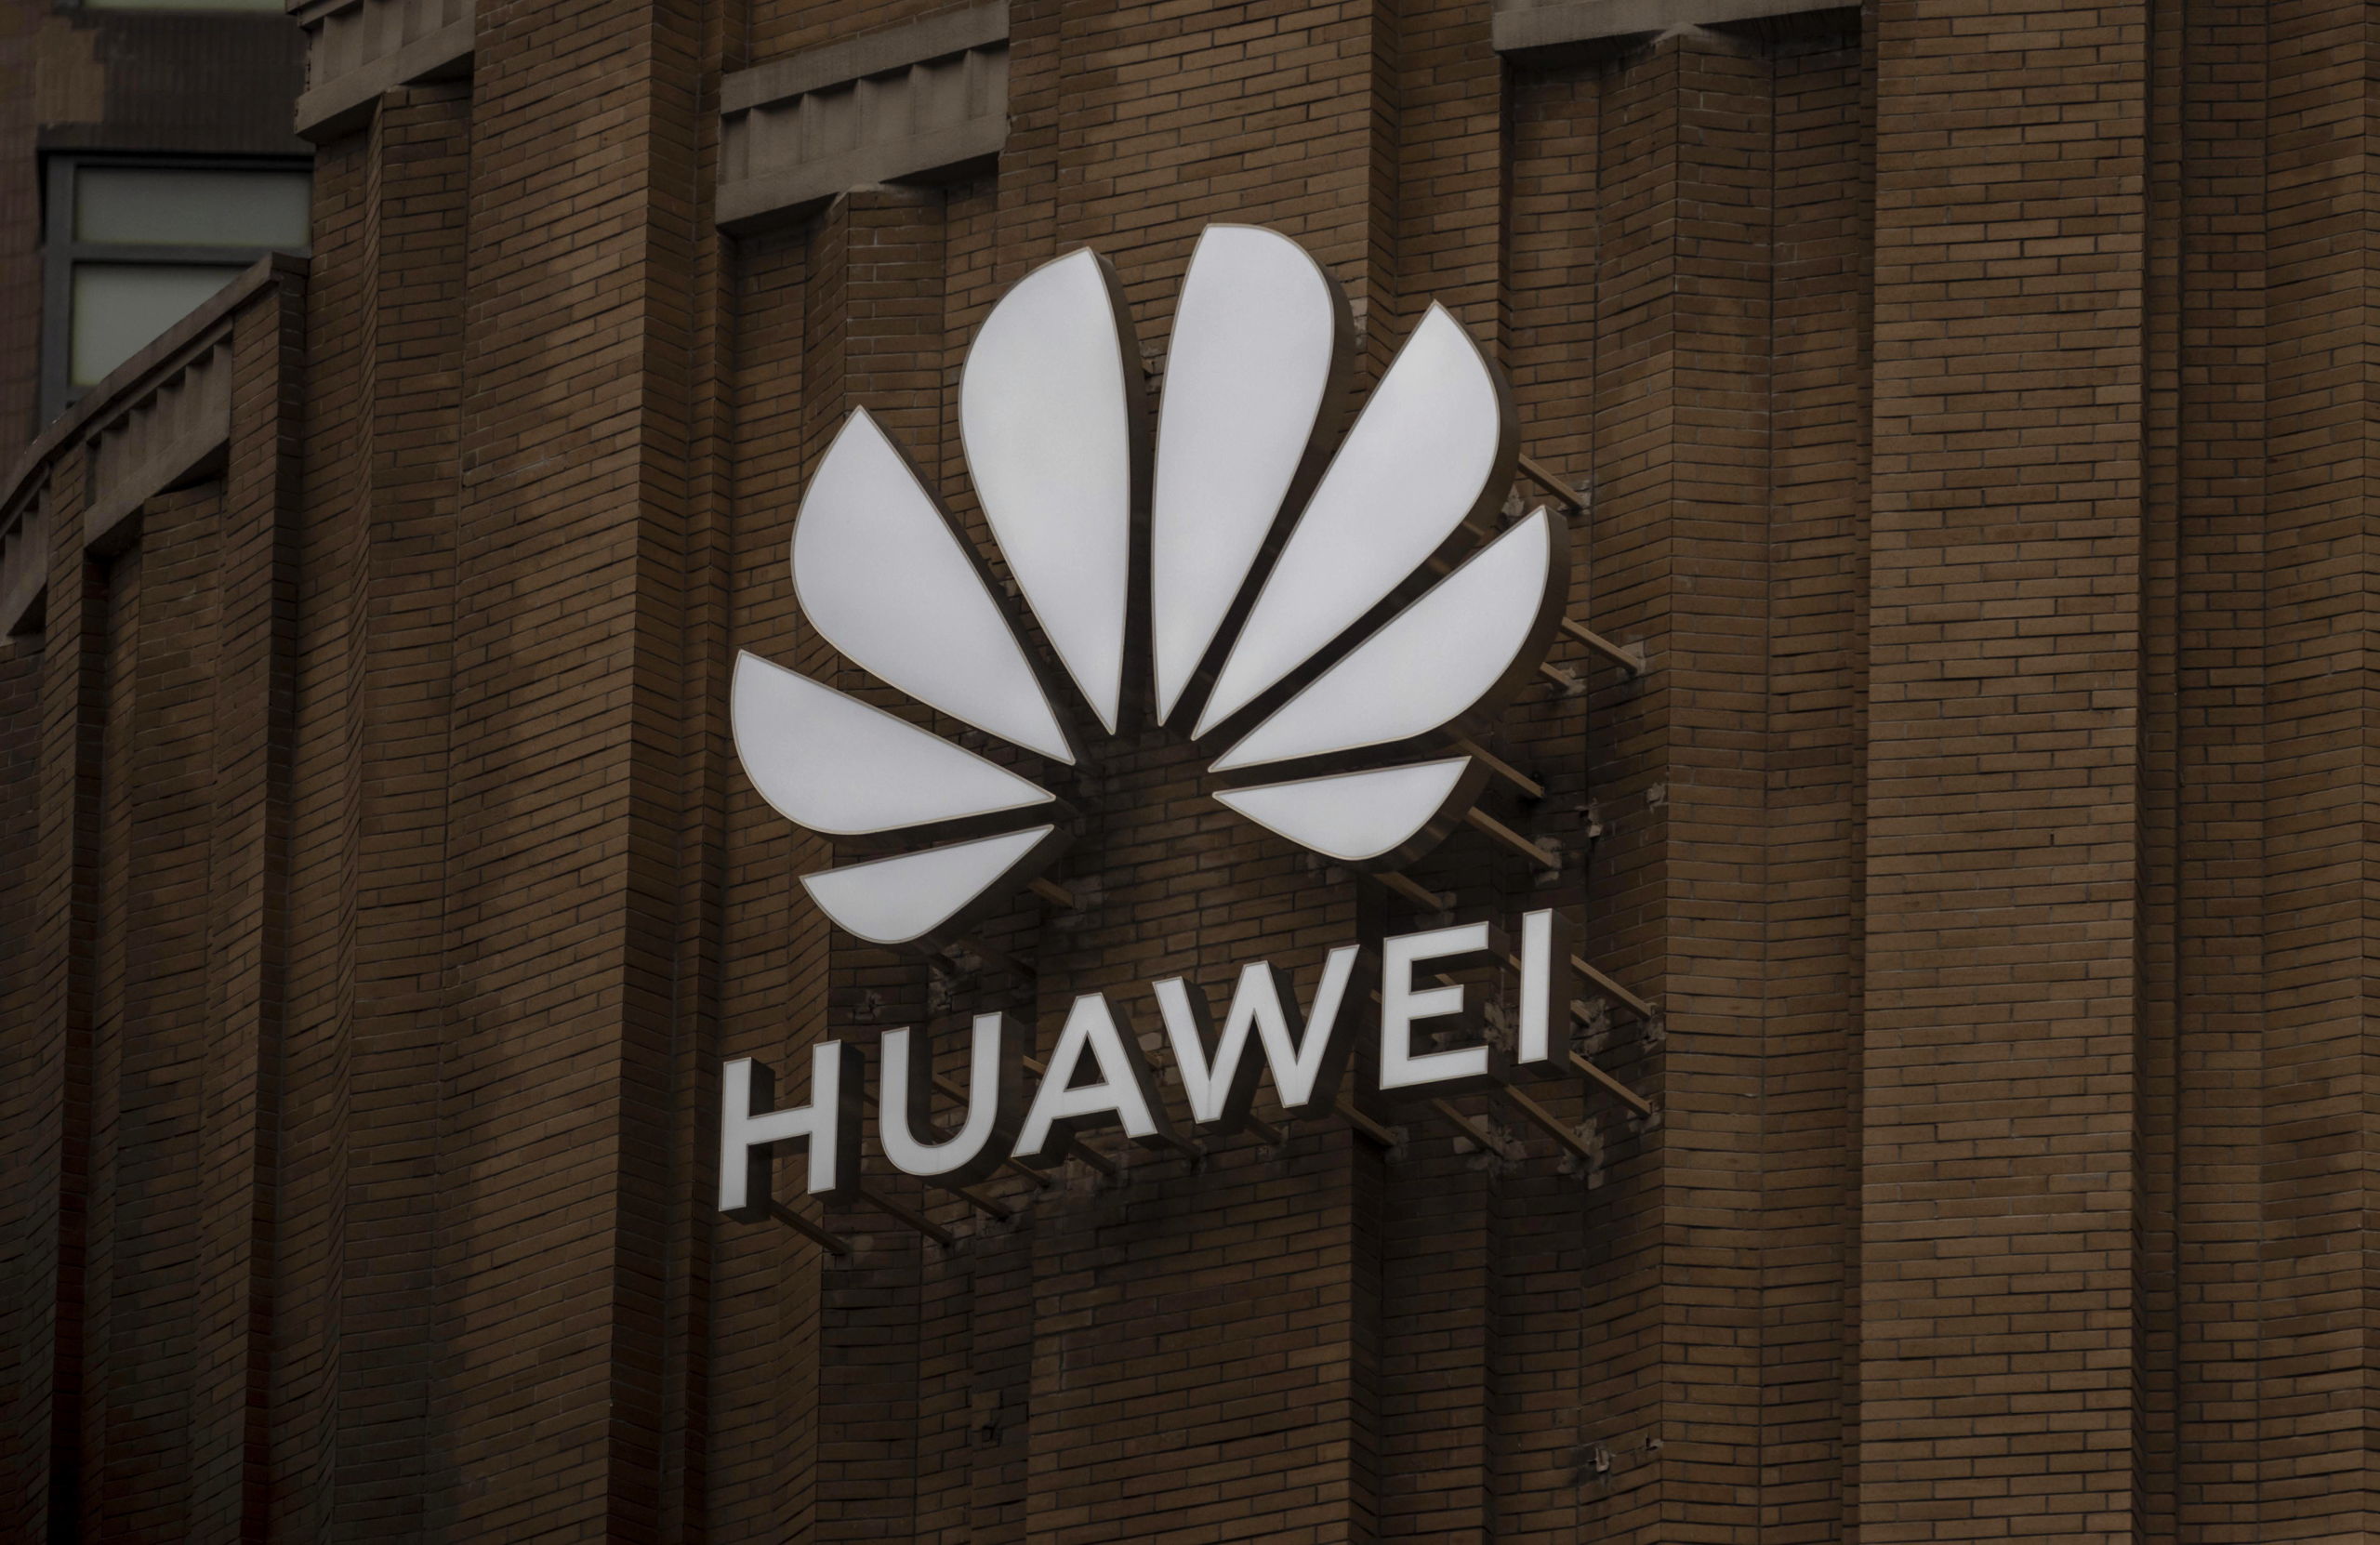 2020-07-16 14:20:15 epa08549223 Huawei's newest flagship store building is seen in Shanghai, China, 16 July 2020. British digital secretary announced on 14 July 2020 that country's telecom network will not be allowed to purchase new Huawei 5G kit from 31 December and that all Huawei's equipment should be sorted out of UK's mobile networks by 2027. Chinese government 'strongly opposed groundless ban of Huawei's 5G kit'.  EPA/ALEX PLAVEVSKI